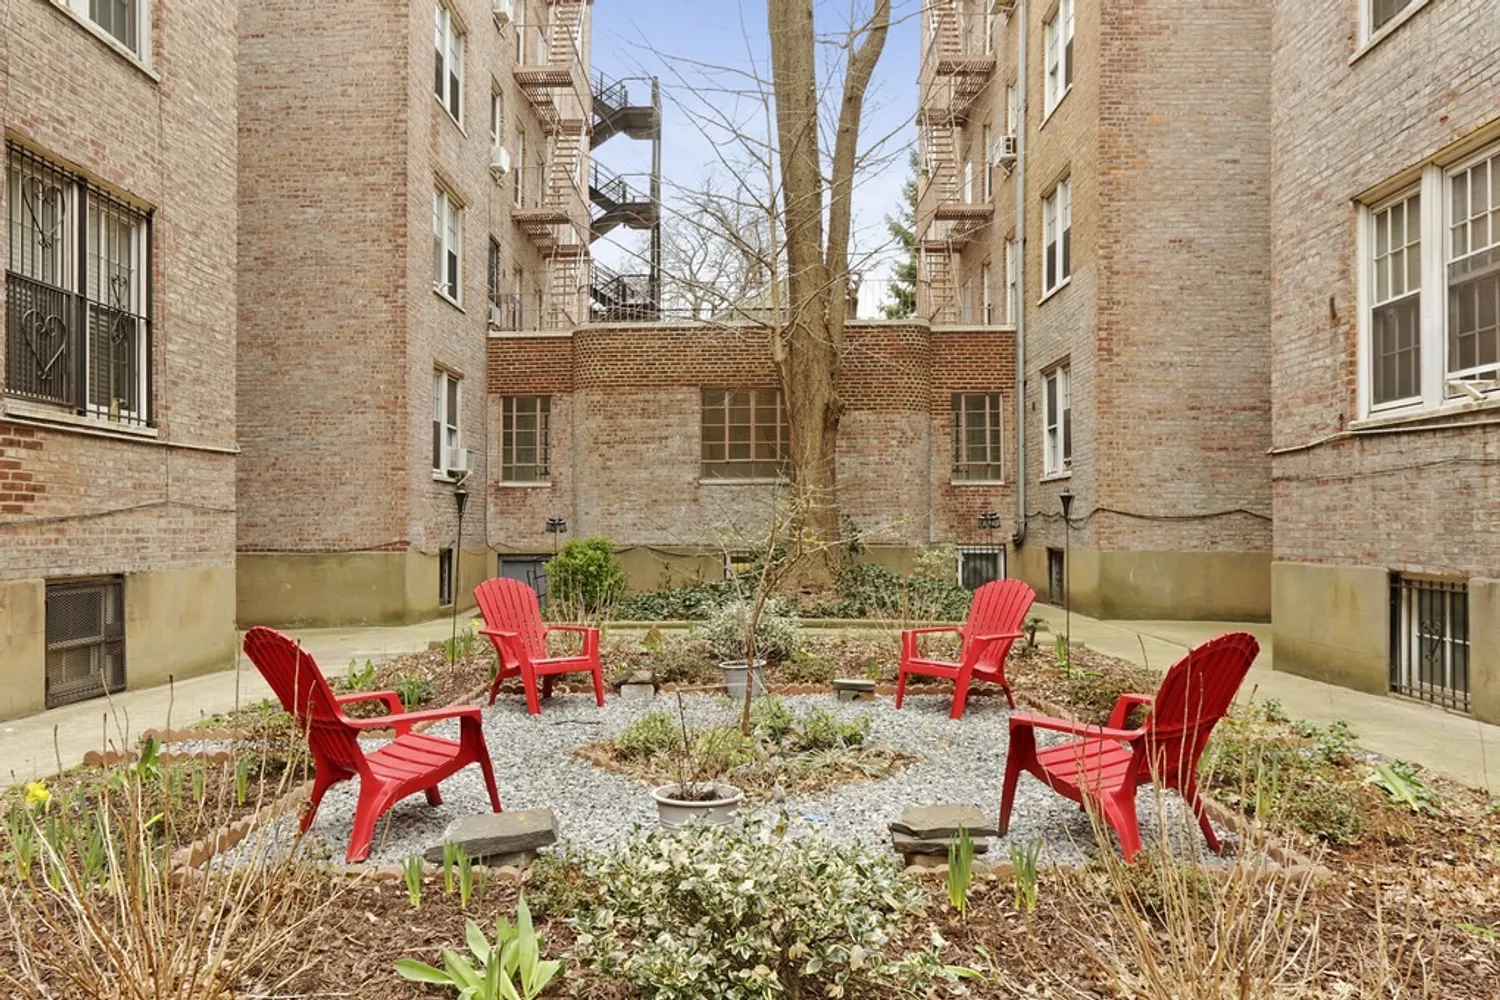 One of the two shared courtyards